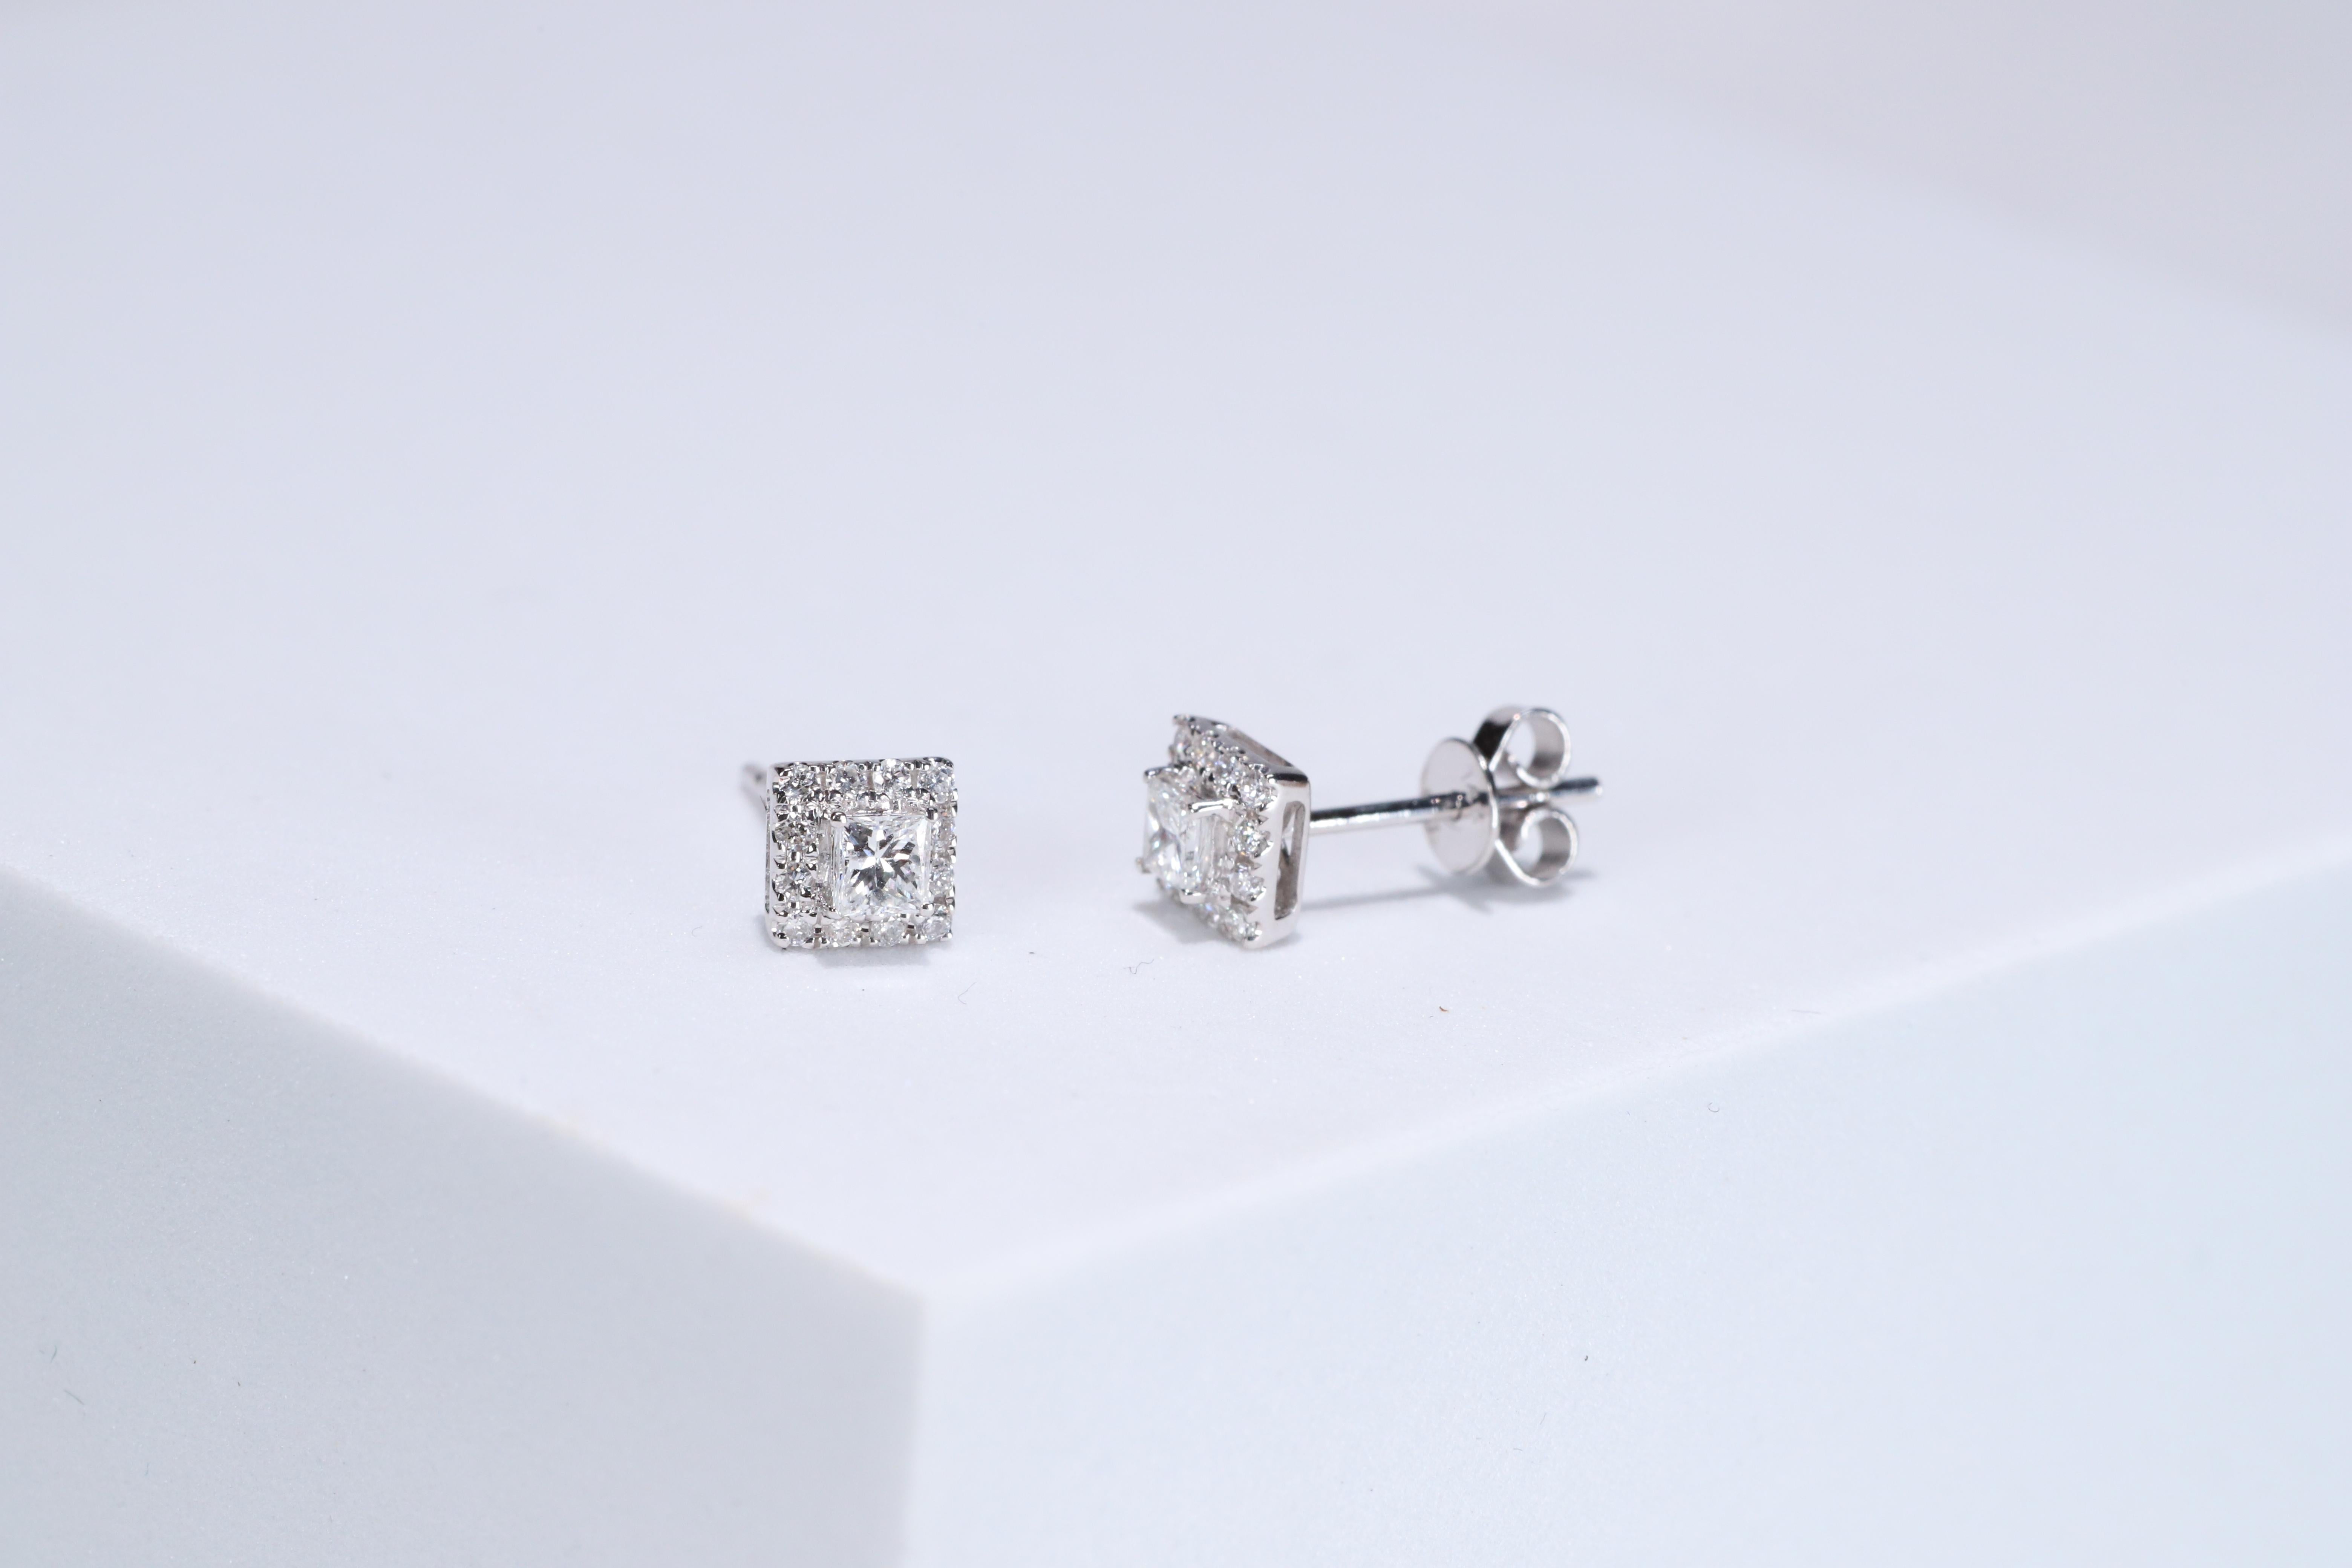 Decorate yourself in elegance with this Earring is crafted from 14-karat White Gold by Gin & Grace Earring. This Earring is made up of Round-cut White Diamond (24 pcs) 0.14 carat and Princess-cut White Diamond (2 pcs) 0.24 carat. This Earring is